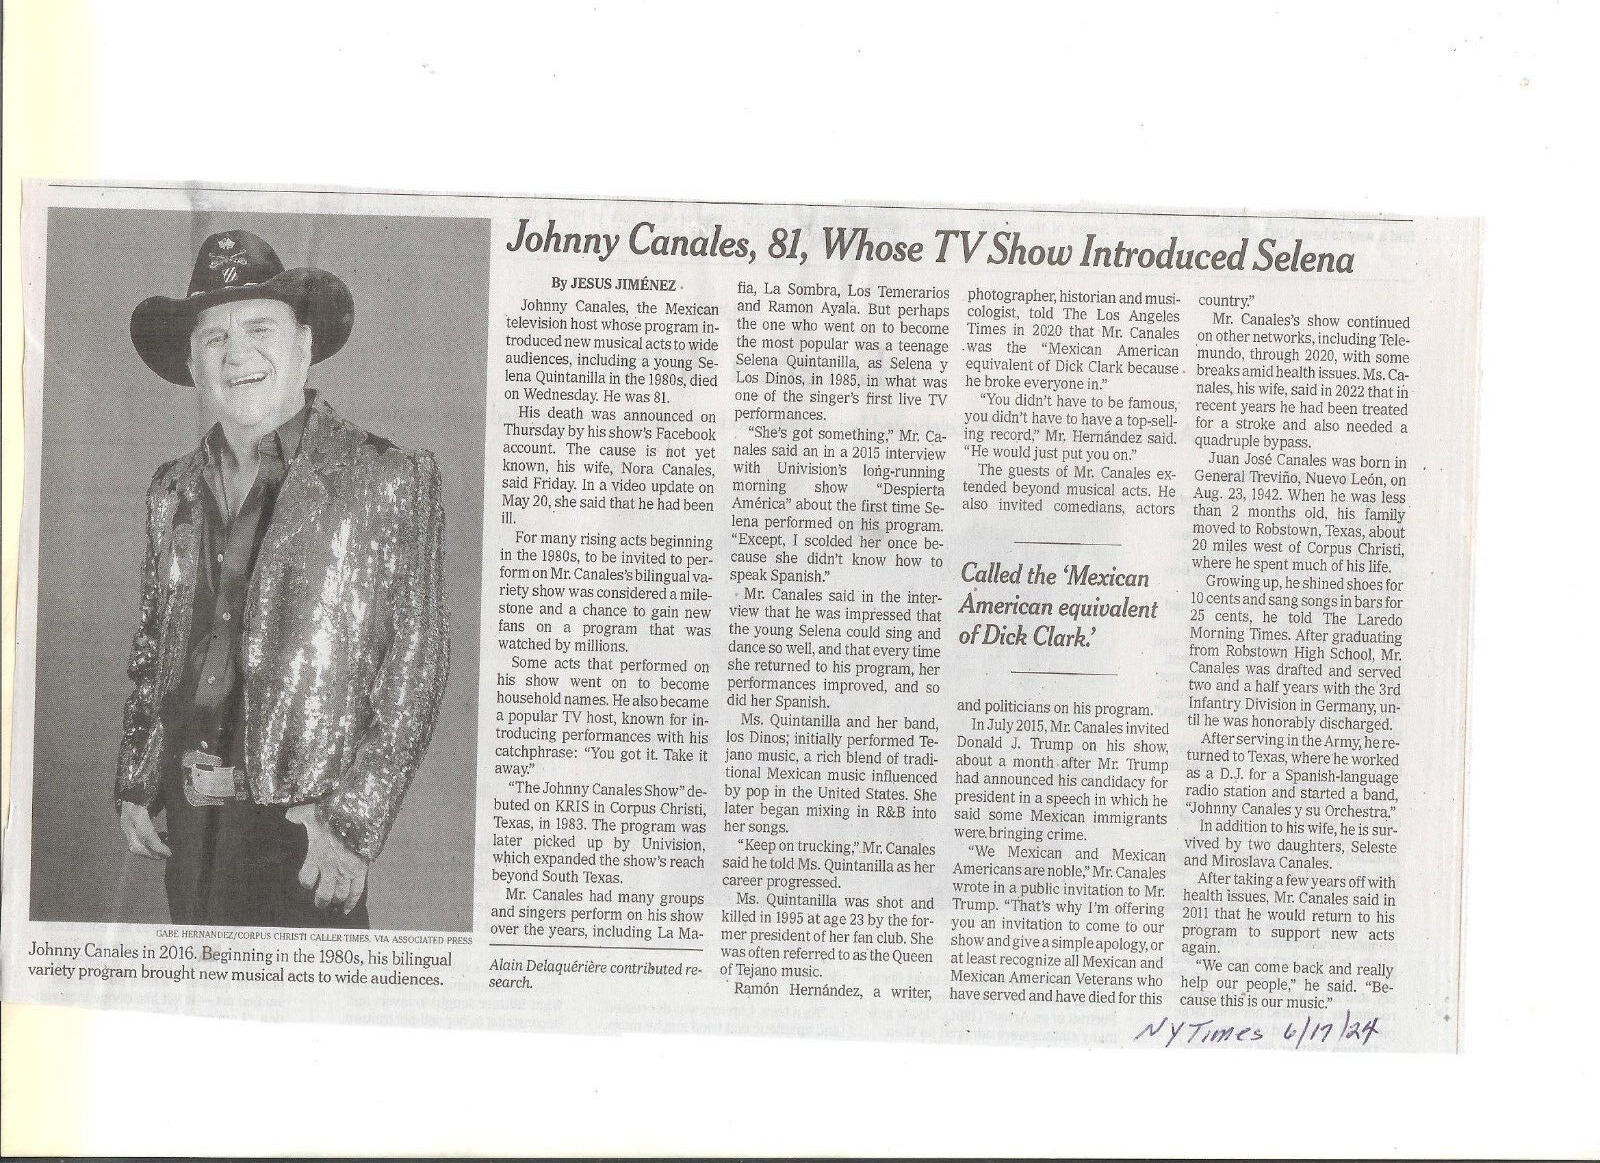 Johnny Canales Obituary Show Introduced Selena -NYtimes June 17, 2024